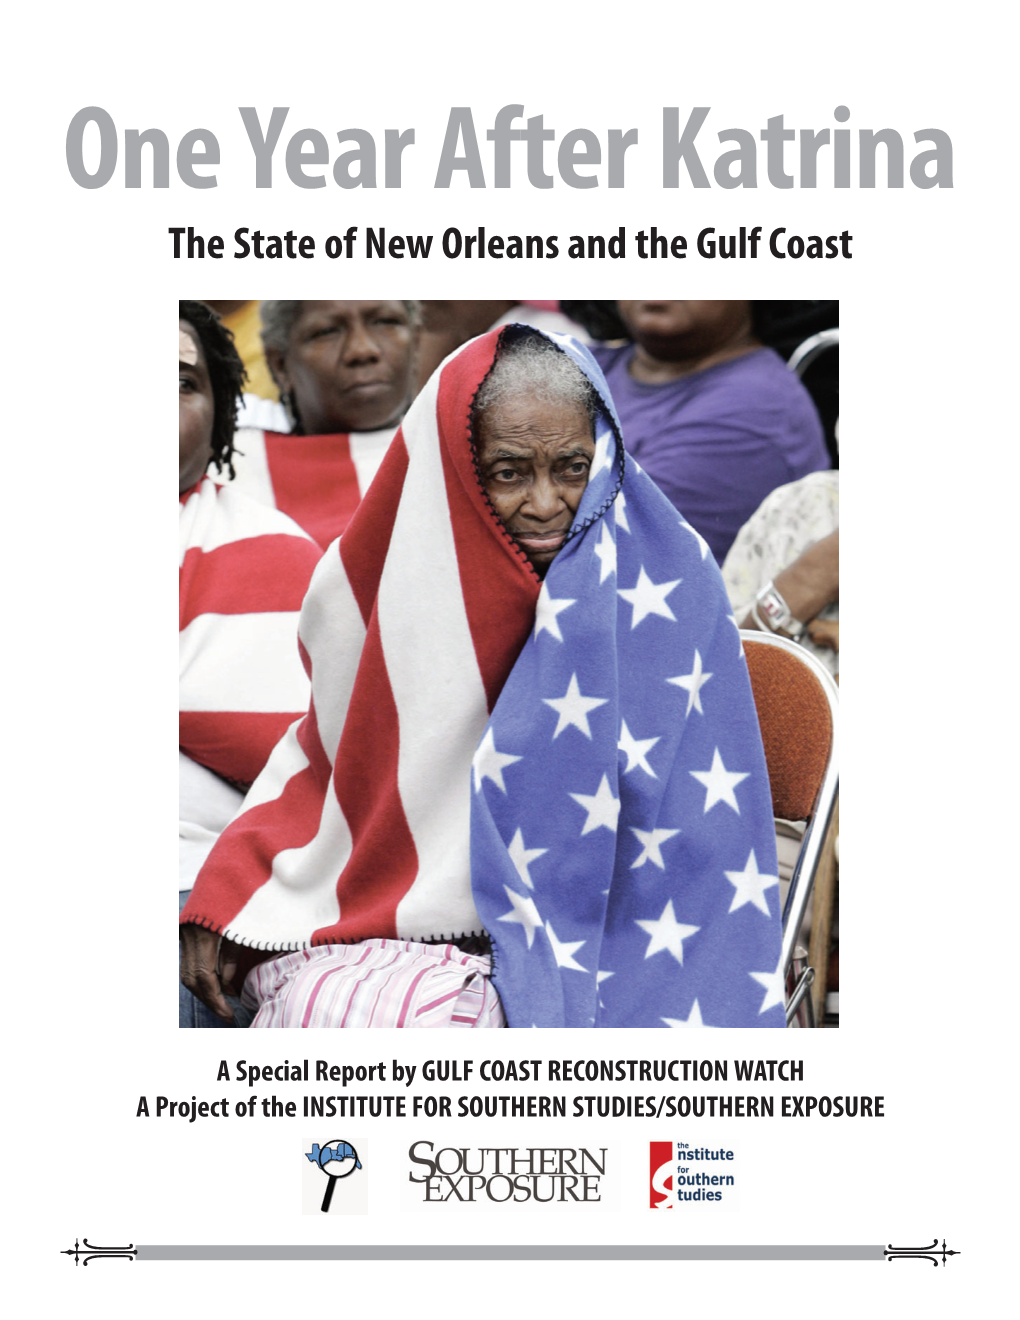 One Year After Katrina the State of New Orleans and the Gulf Coast